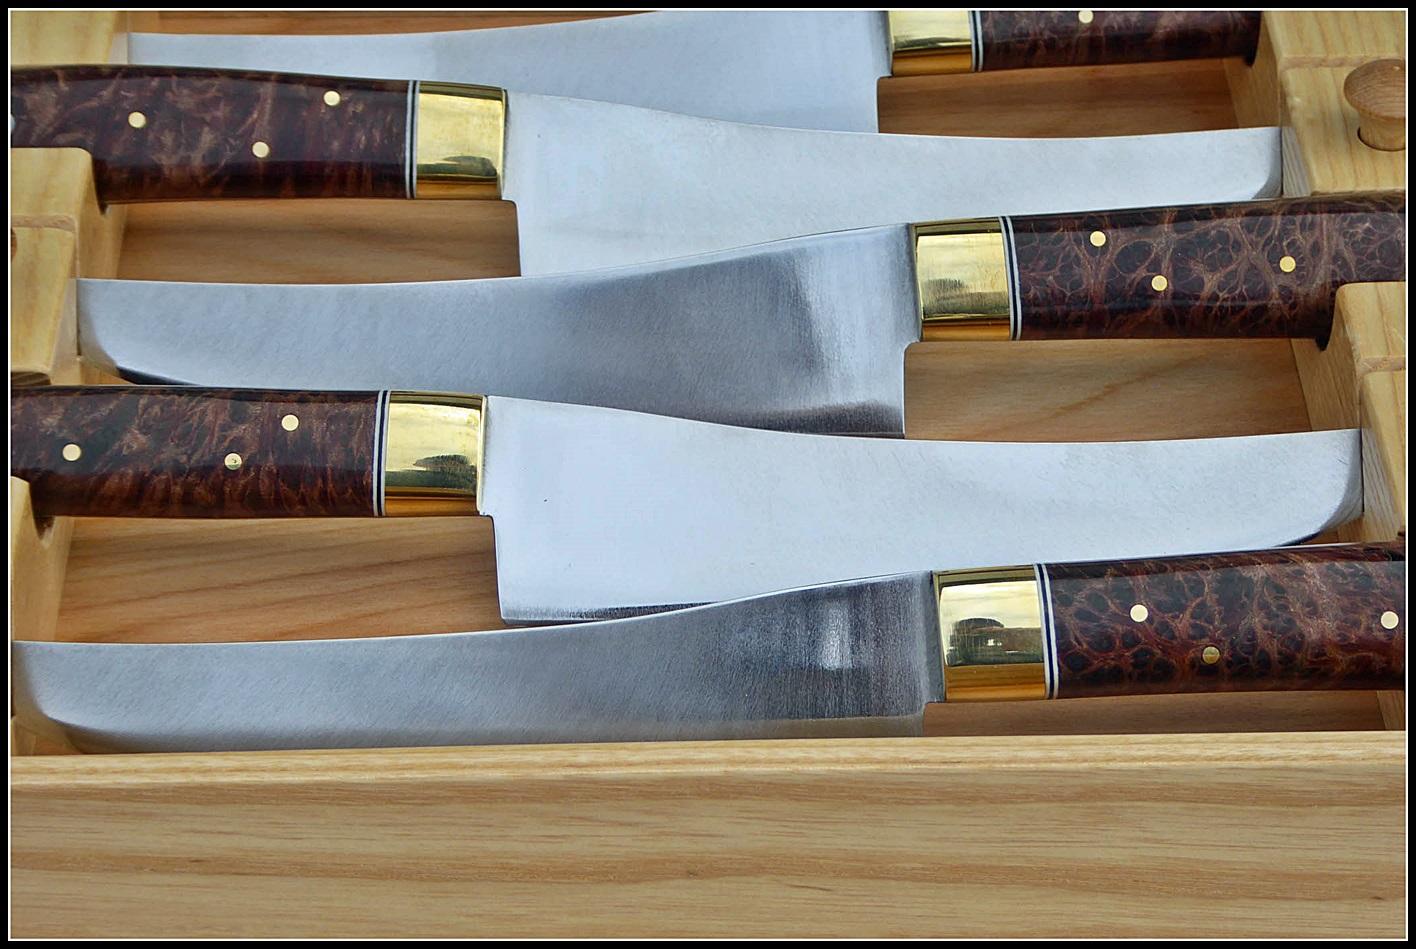 Close up of nested 8" x 2.5" Carving knives - see description in slide #1 for further details.